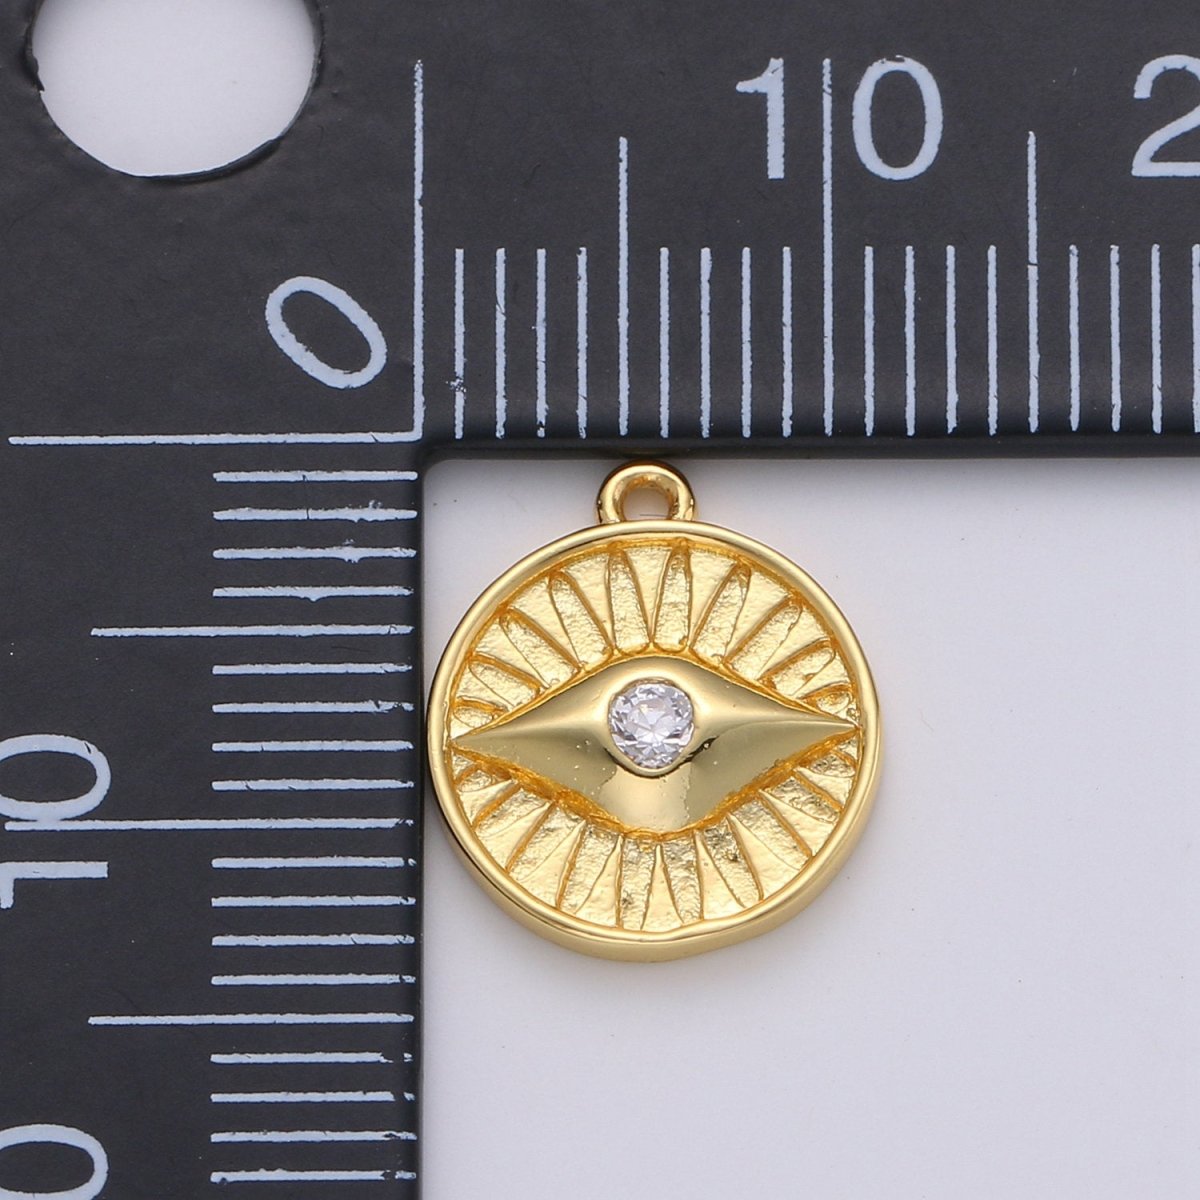 Dainty 14k Gold Filled Charm Coin Evil Eye Pendant Charm for Bracelet Necklace Earring Component for Jewelry Making D-279 D-280 - DLUXCA